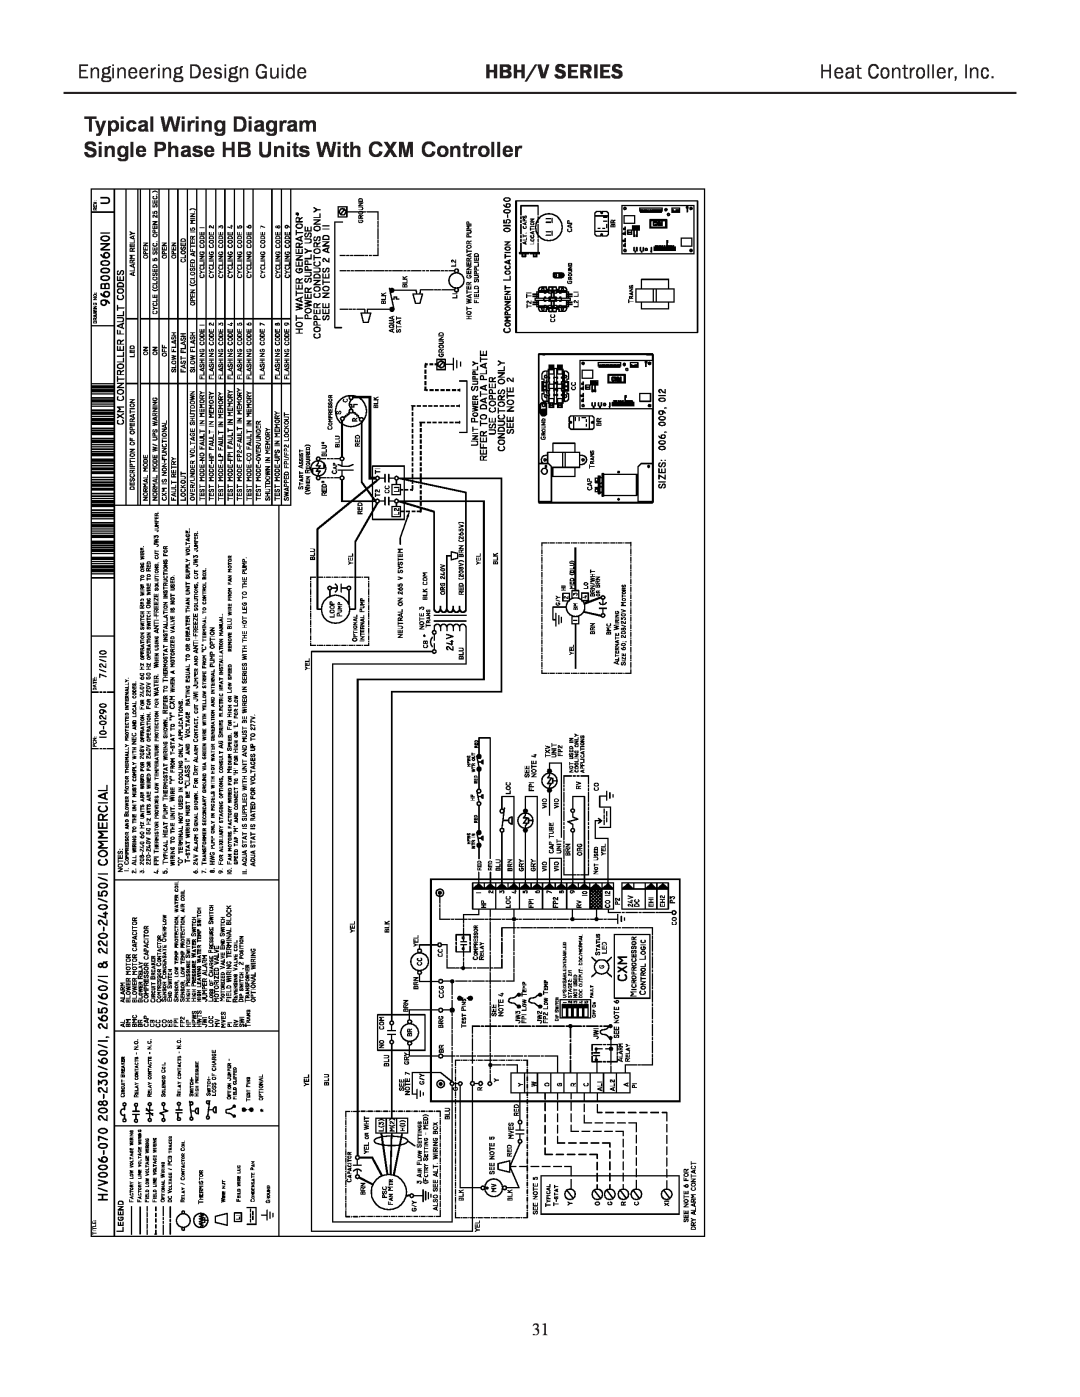 Heat Controller HBH/V manual Typical Wiring Diagram Single Phase HB Units With CXM Controller, Engineering Design Guide 